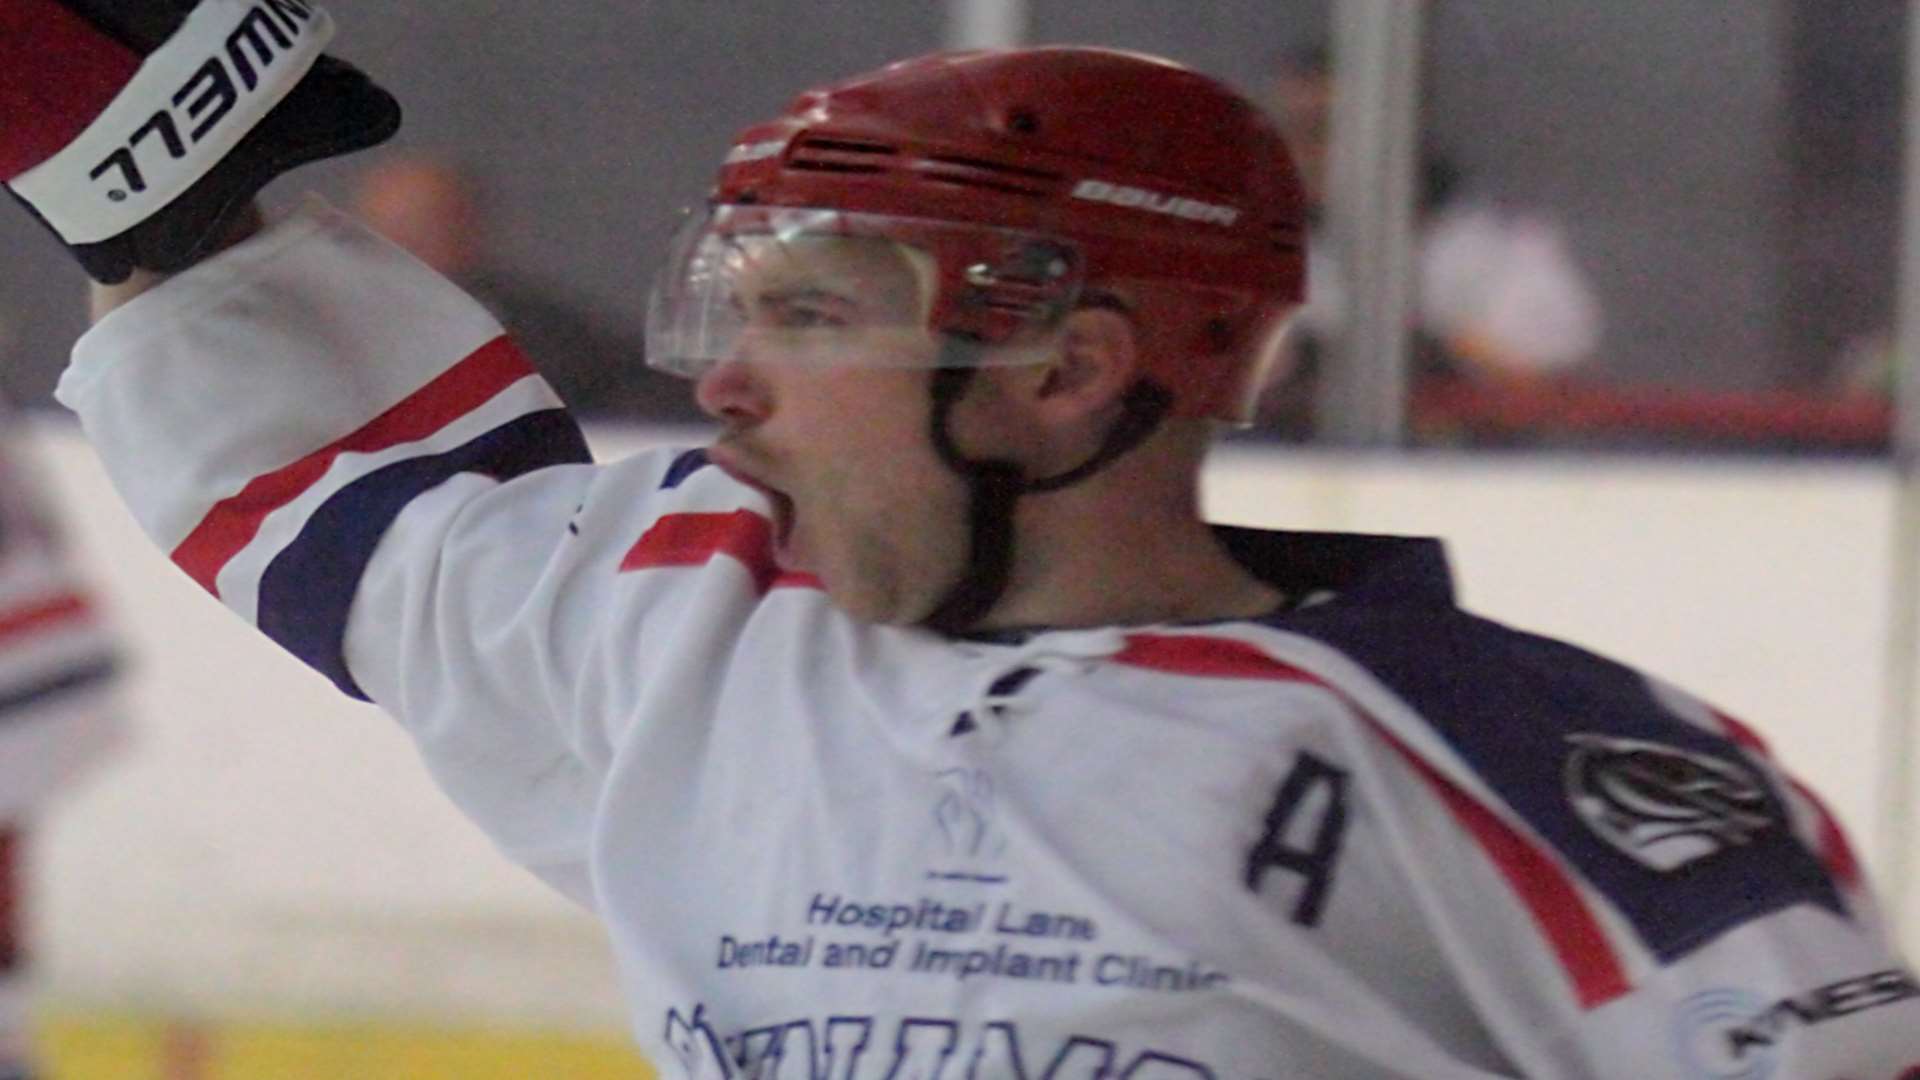 Invicta Dynamos' Andy Smith Picture: Dave Trevallion